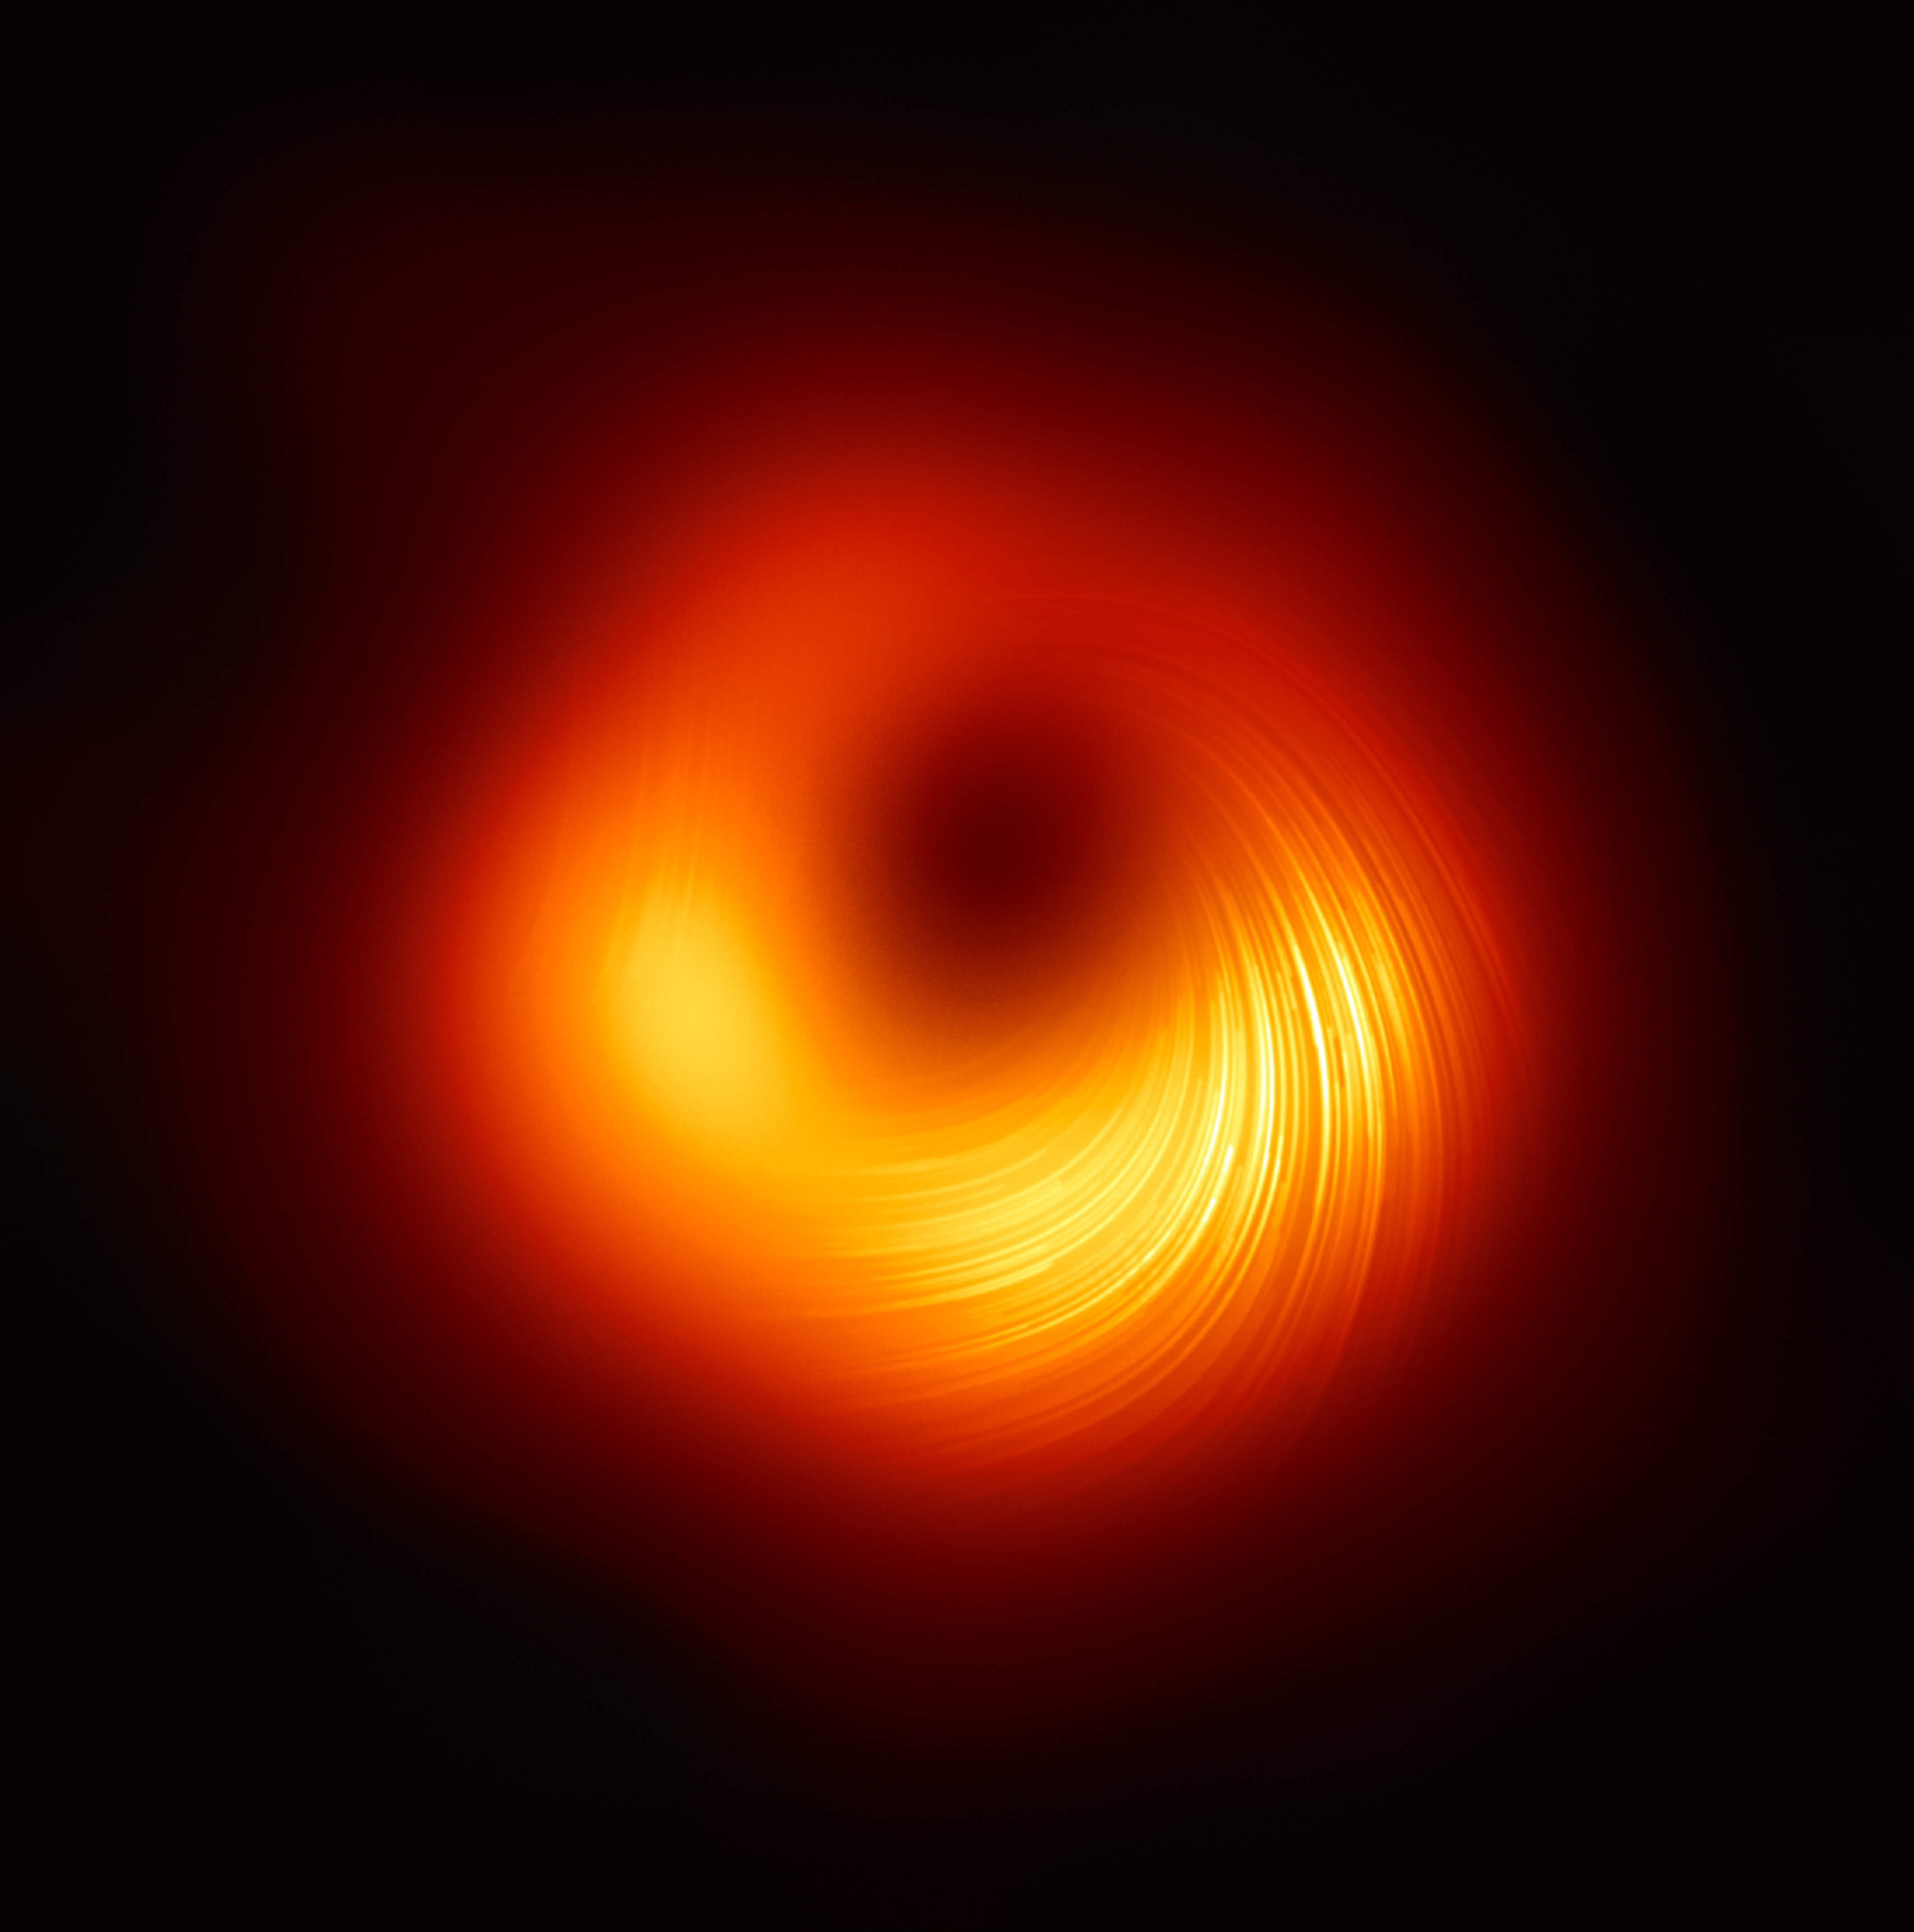 Can Measure How a Black Hole's Mass Has Increased Time? – National Radio Astronomy Observatory